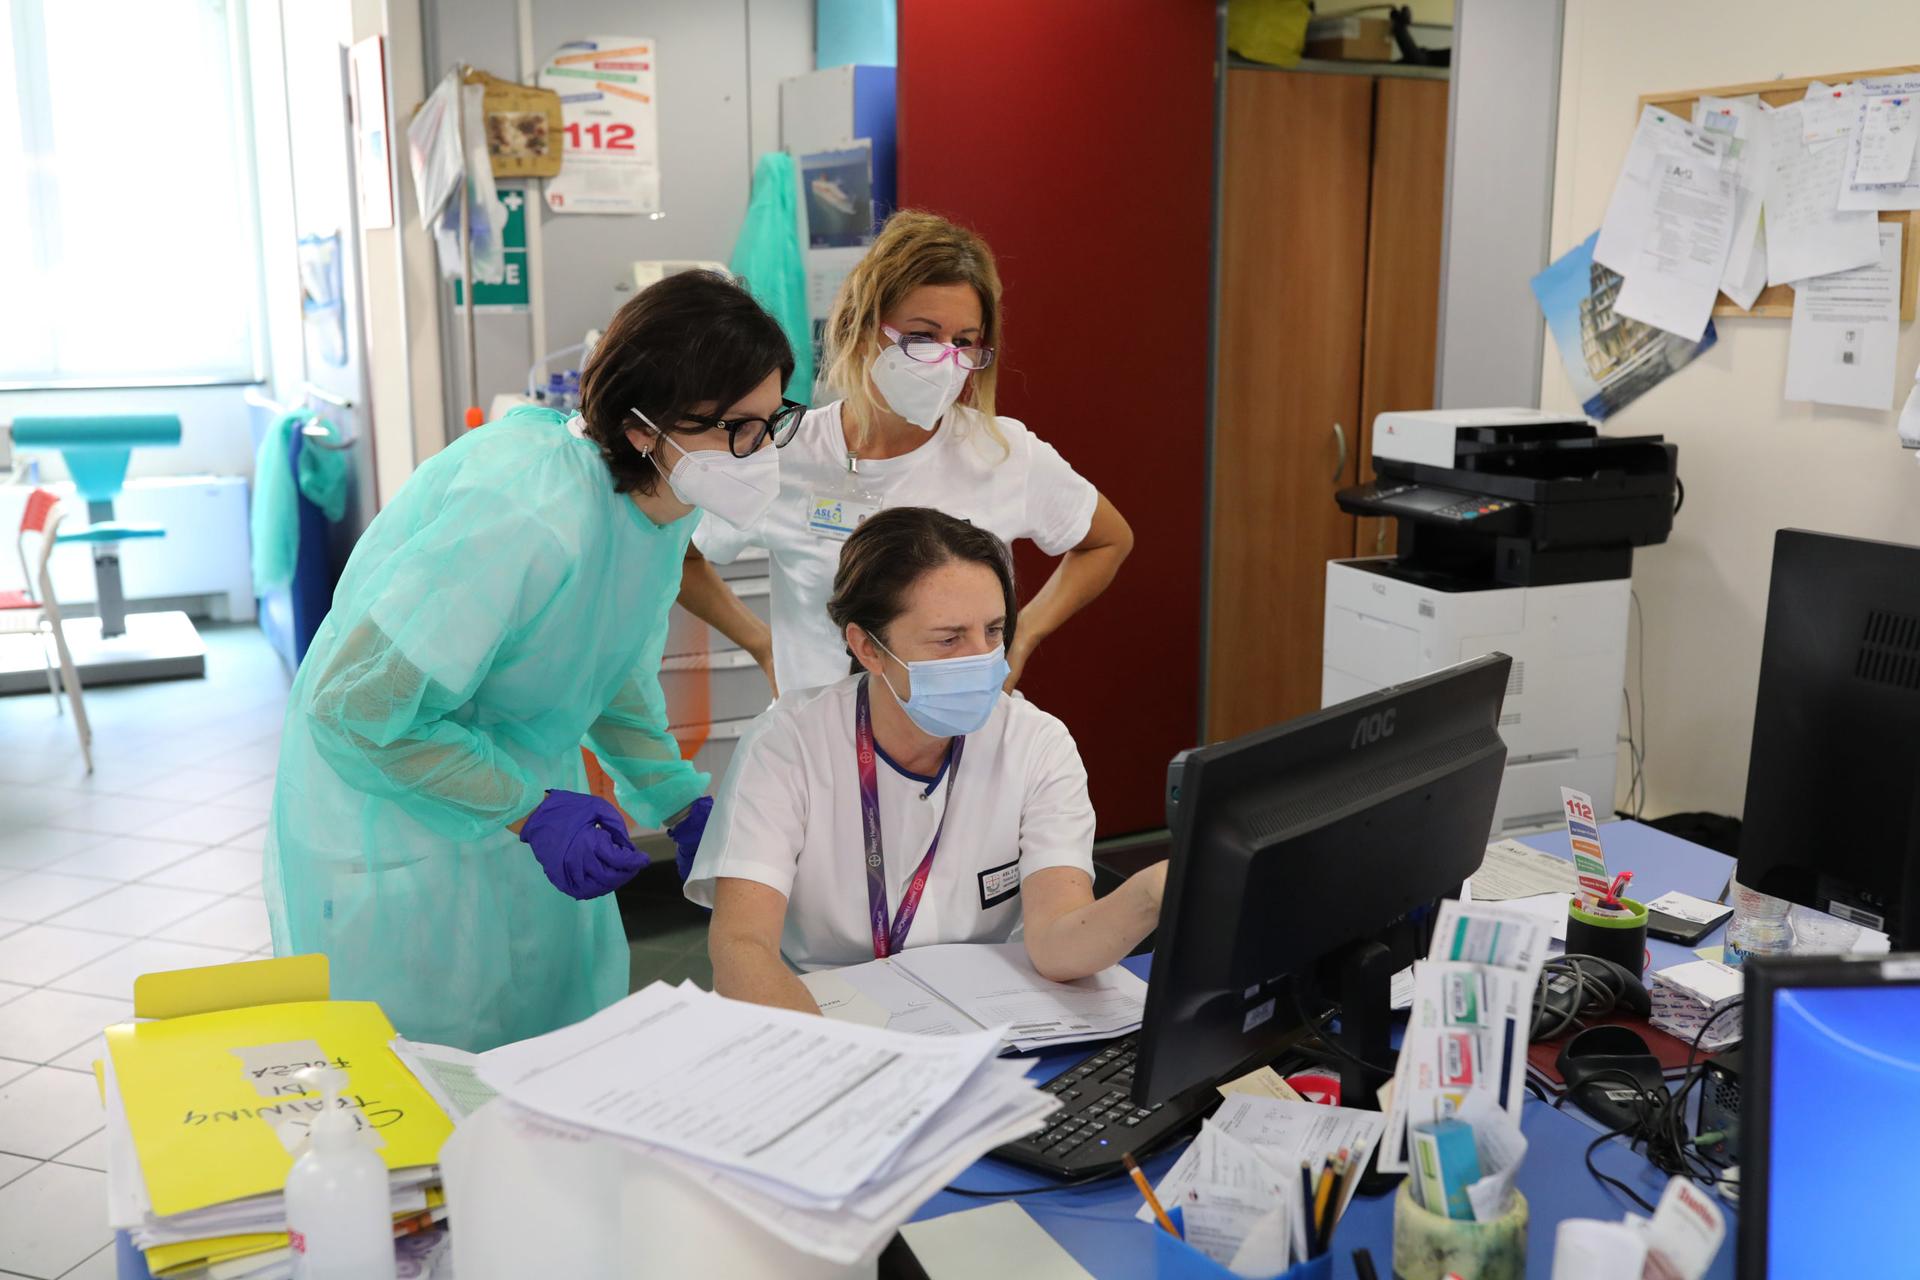 Interoperability and greater data sharing across health care is a top priority of HHS, but its reliance on APIs pose some privacy and security risks. Medical staff analyze patient data at the Department of Rehabilitative Cardiology of ASL 3 Genova on July 21, 2020, in Genoa, Italy. (Photo by Marco Di Lauro/Getty Images)